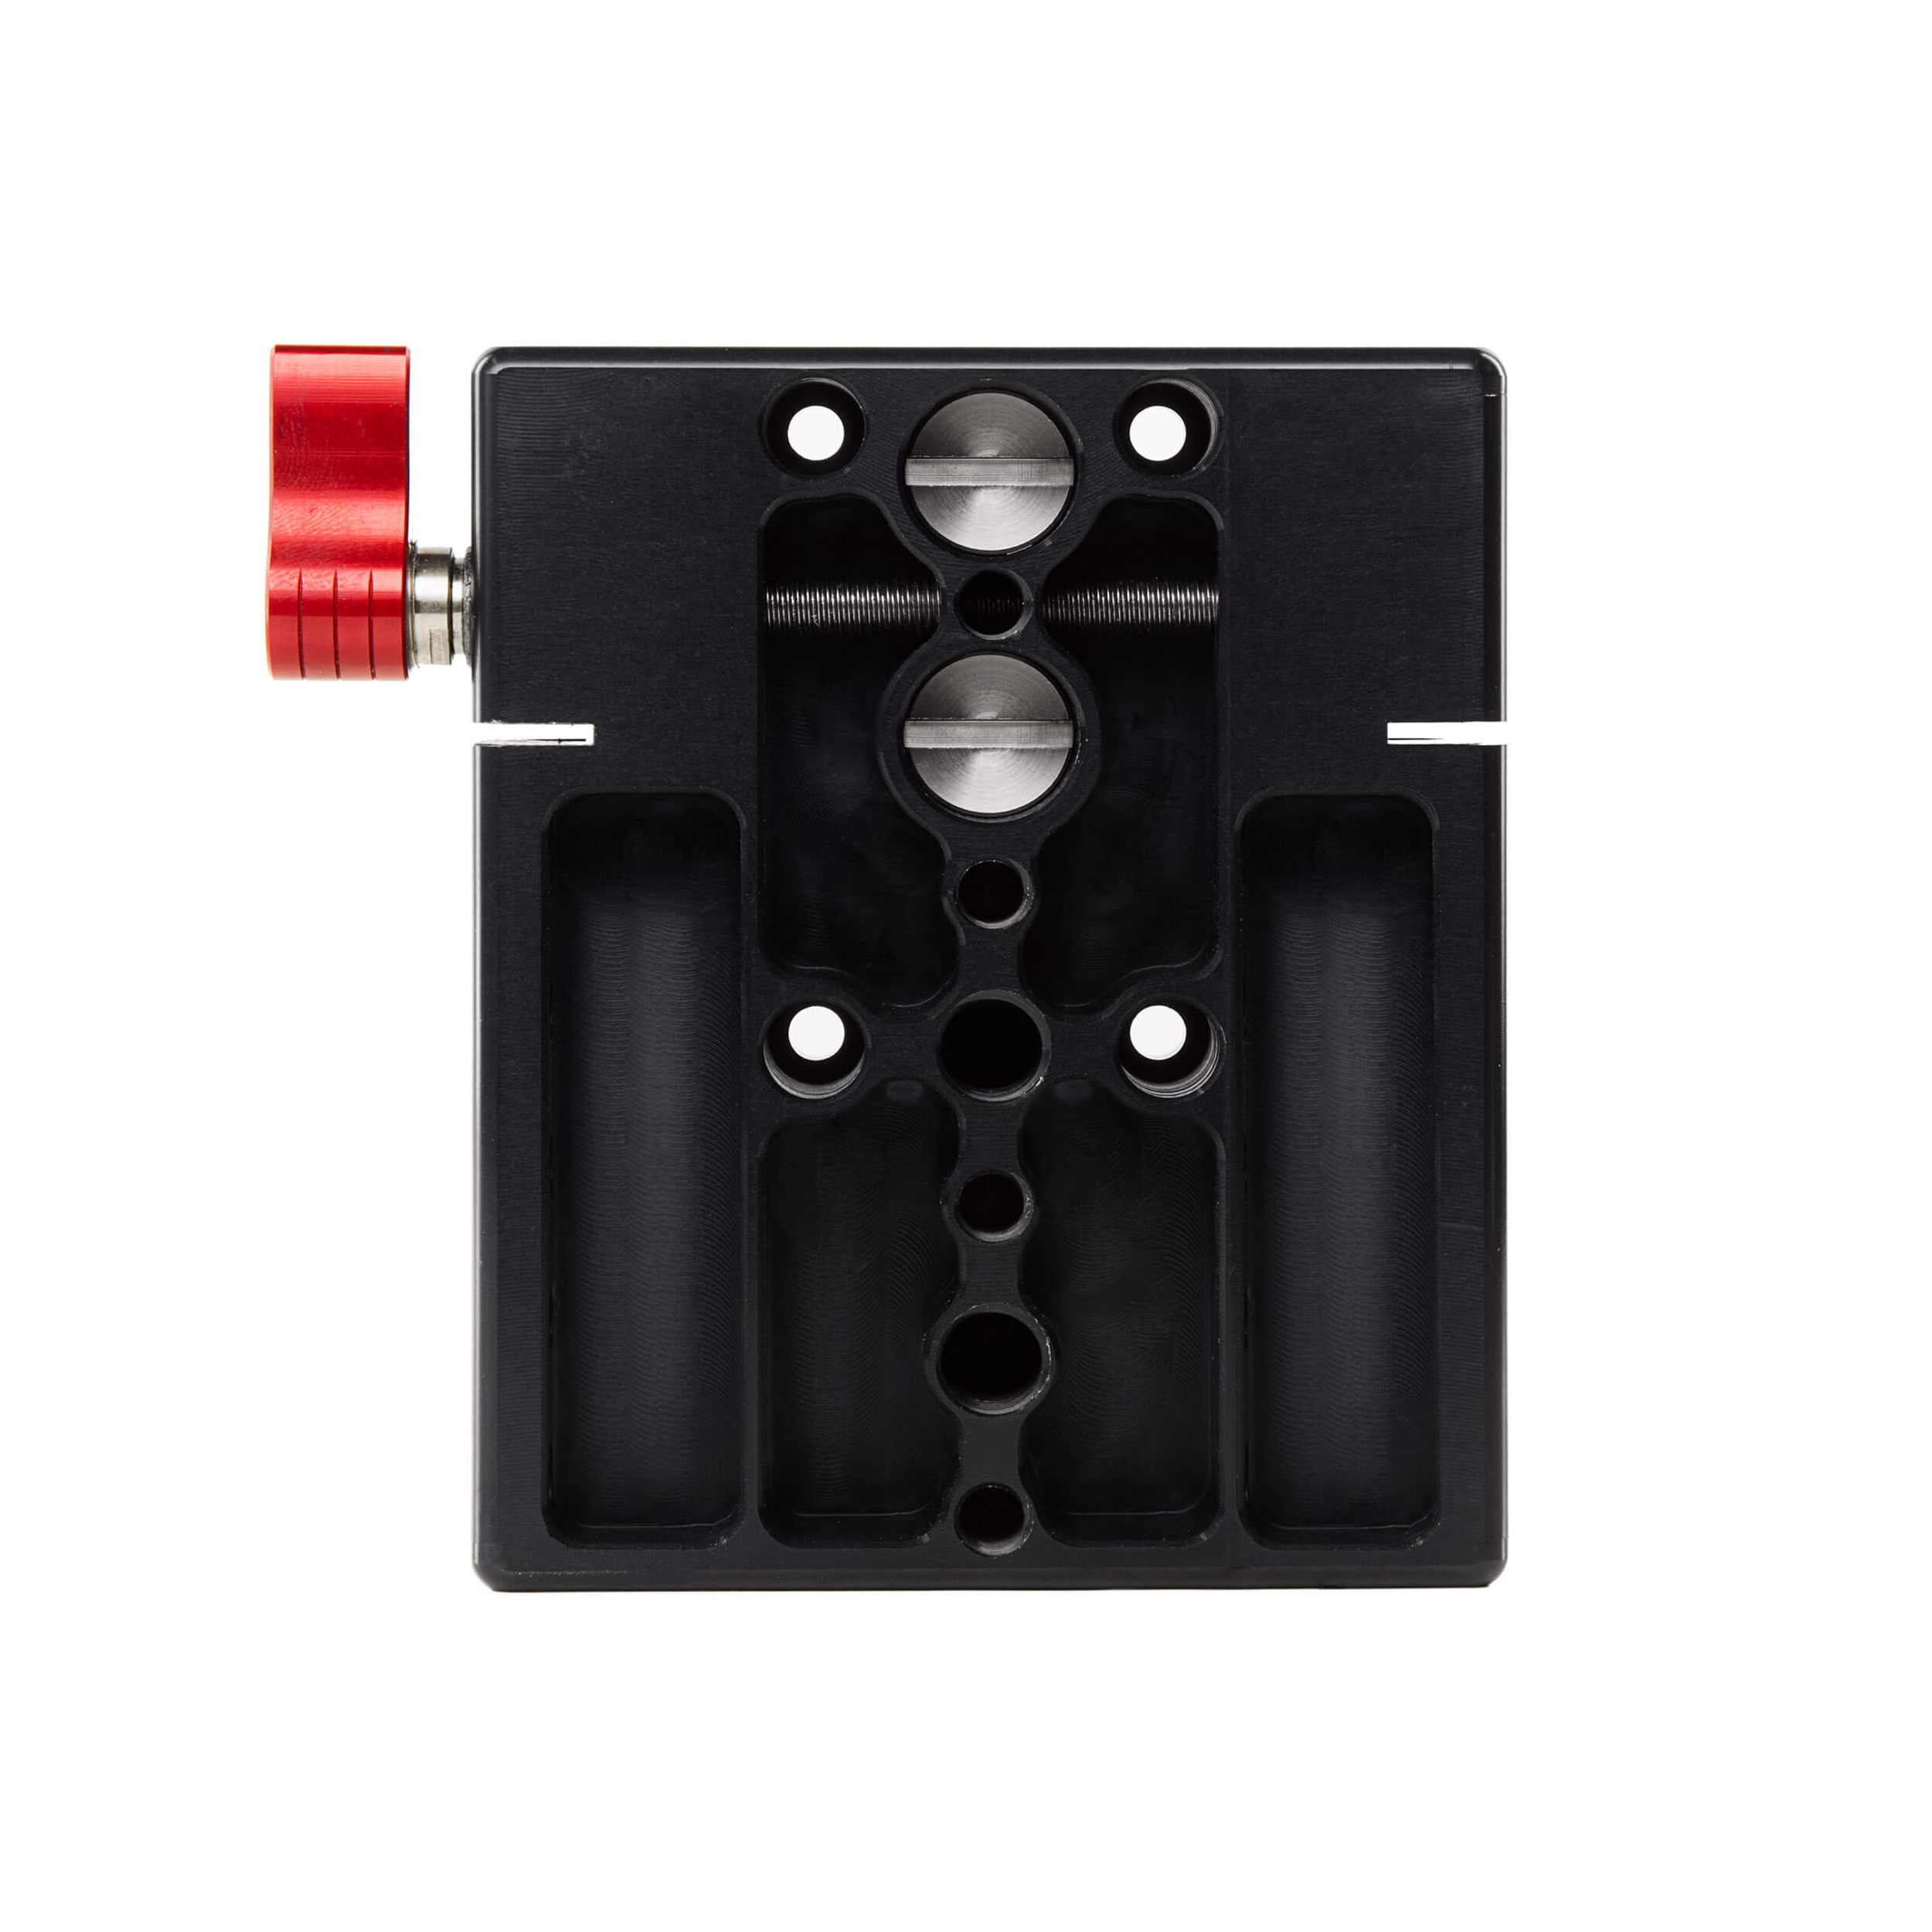 SHAPE Baseplate with 15mm Rods for Canon EOS C500/C300/C100